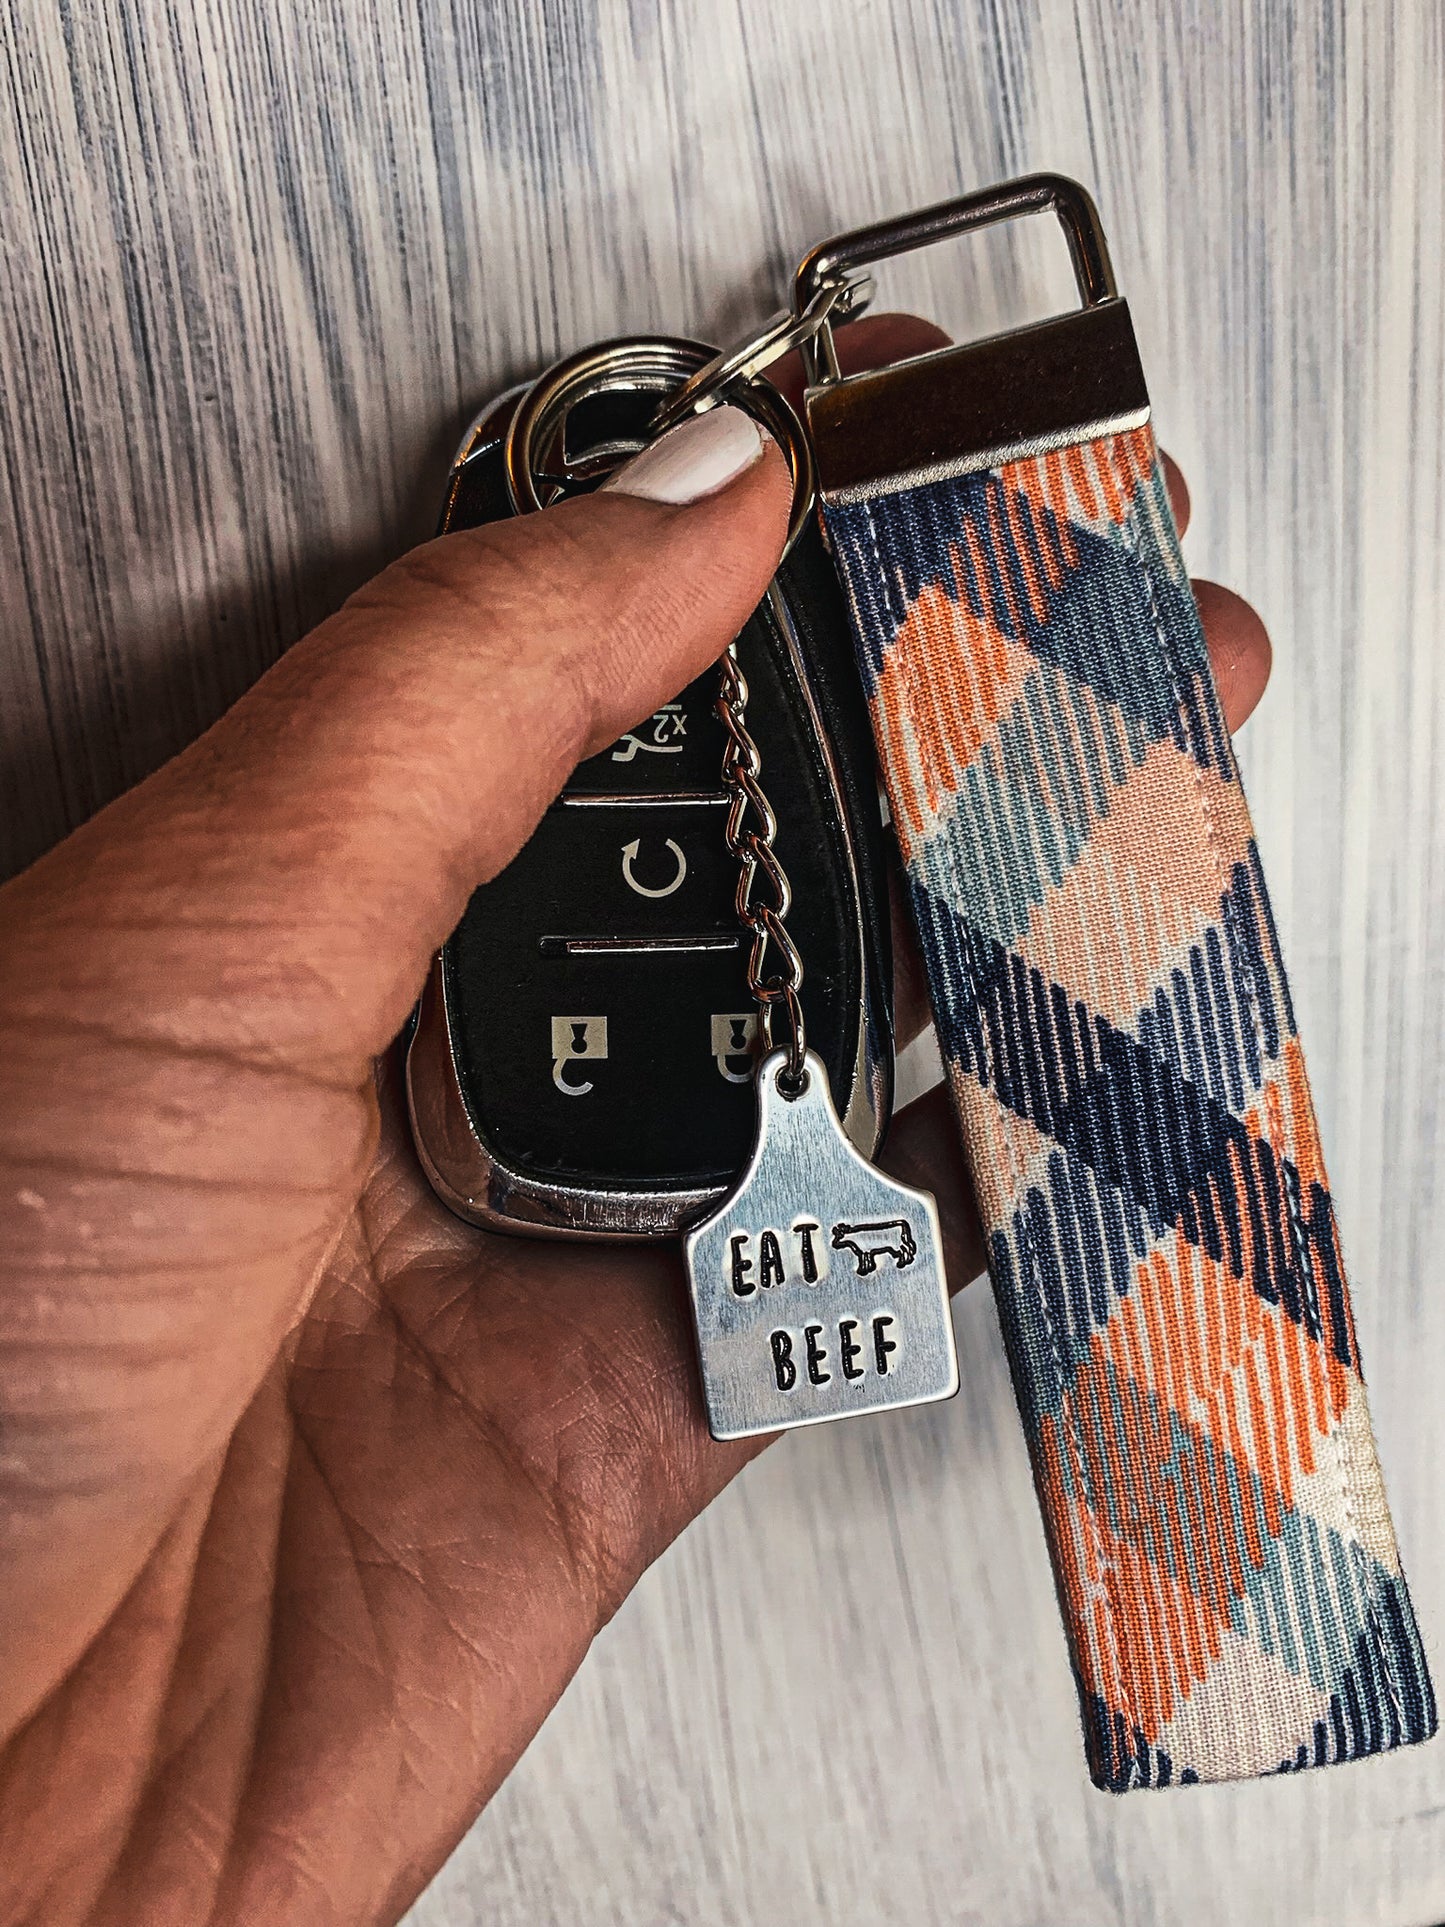 Eat Beef Cow Keychain